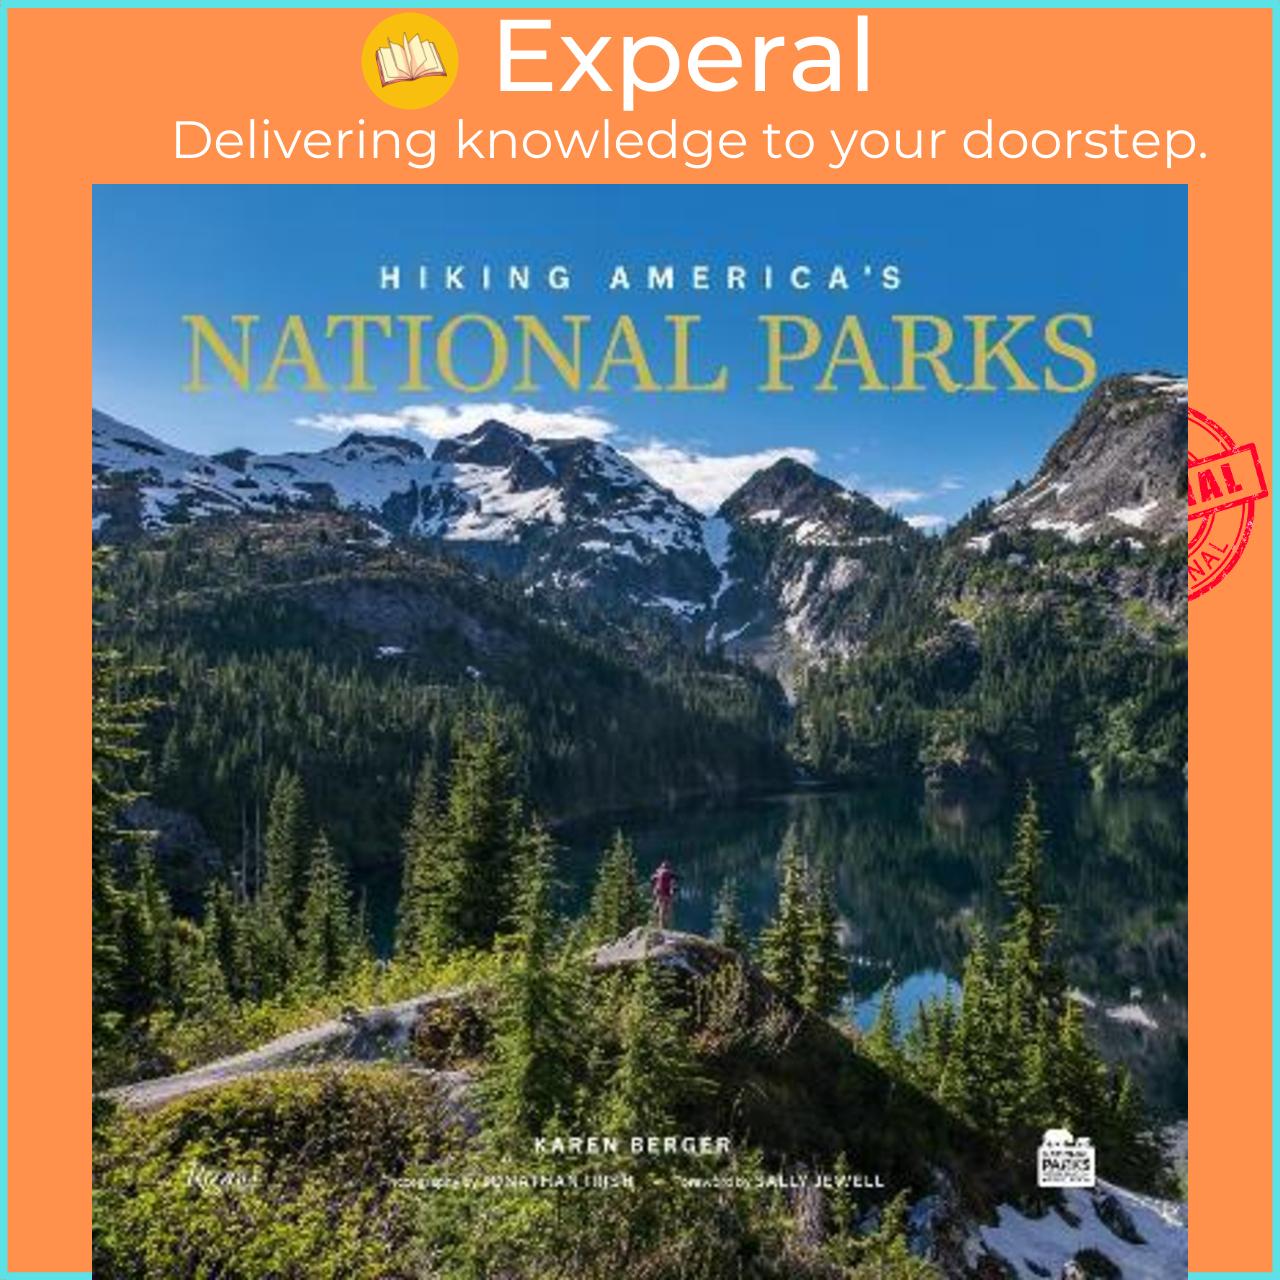 Sách - Hiking America's National Parks by Karen Berger (US edition, hardcover)